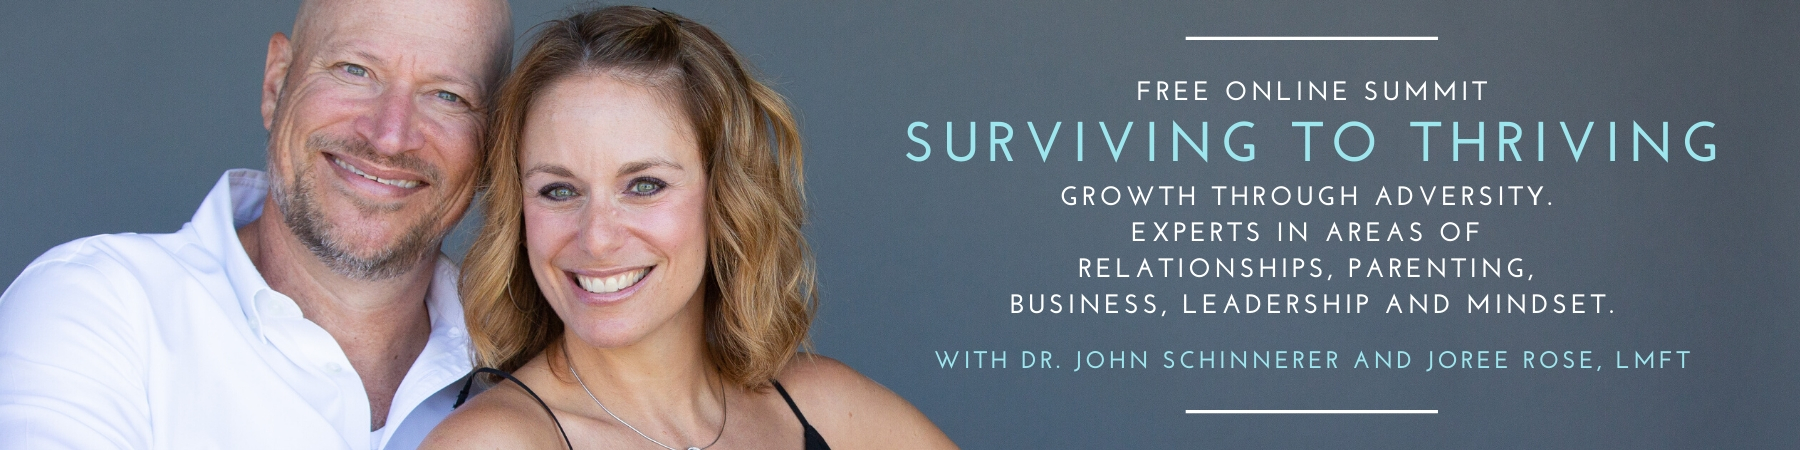 Surviving to thriving - growth through adversity